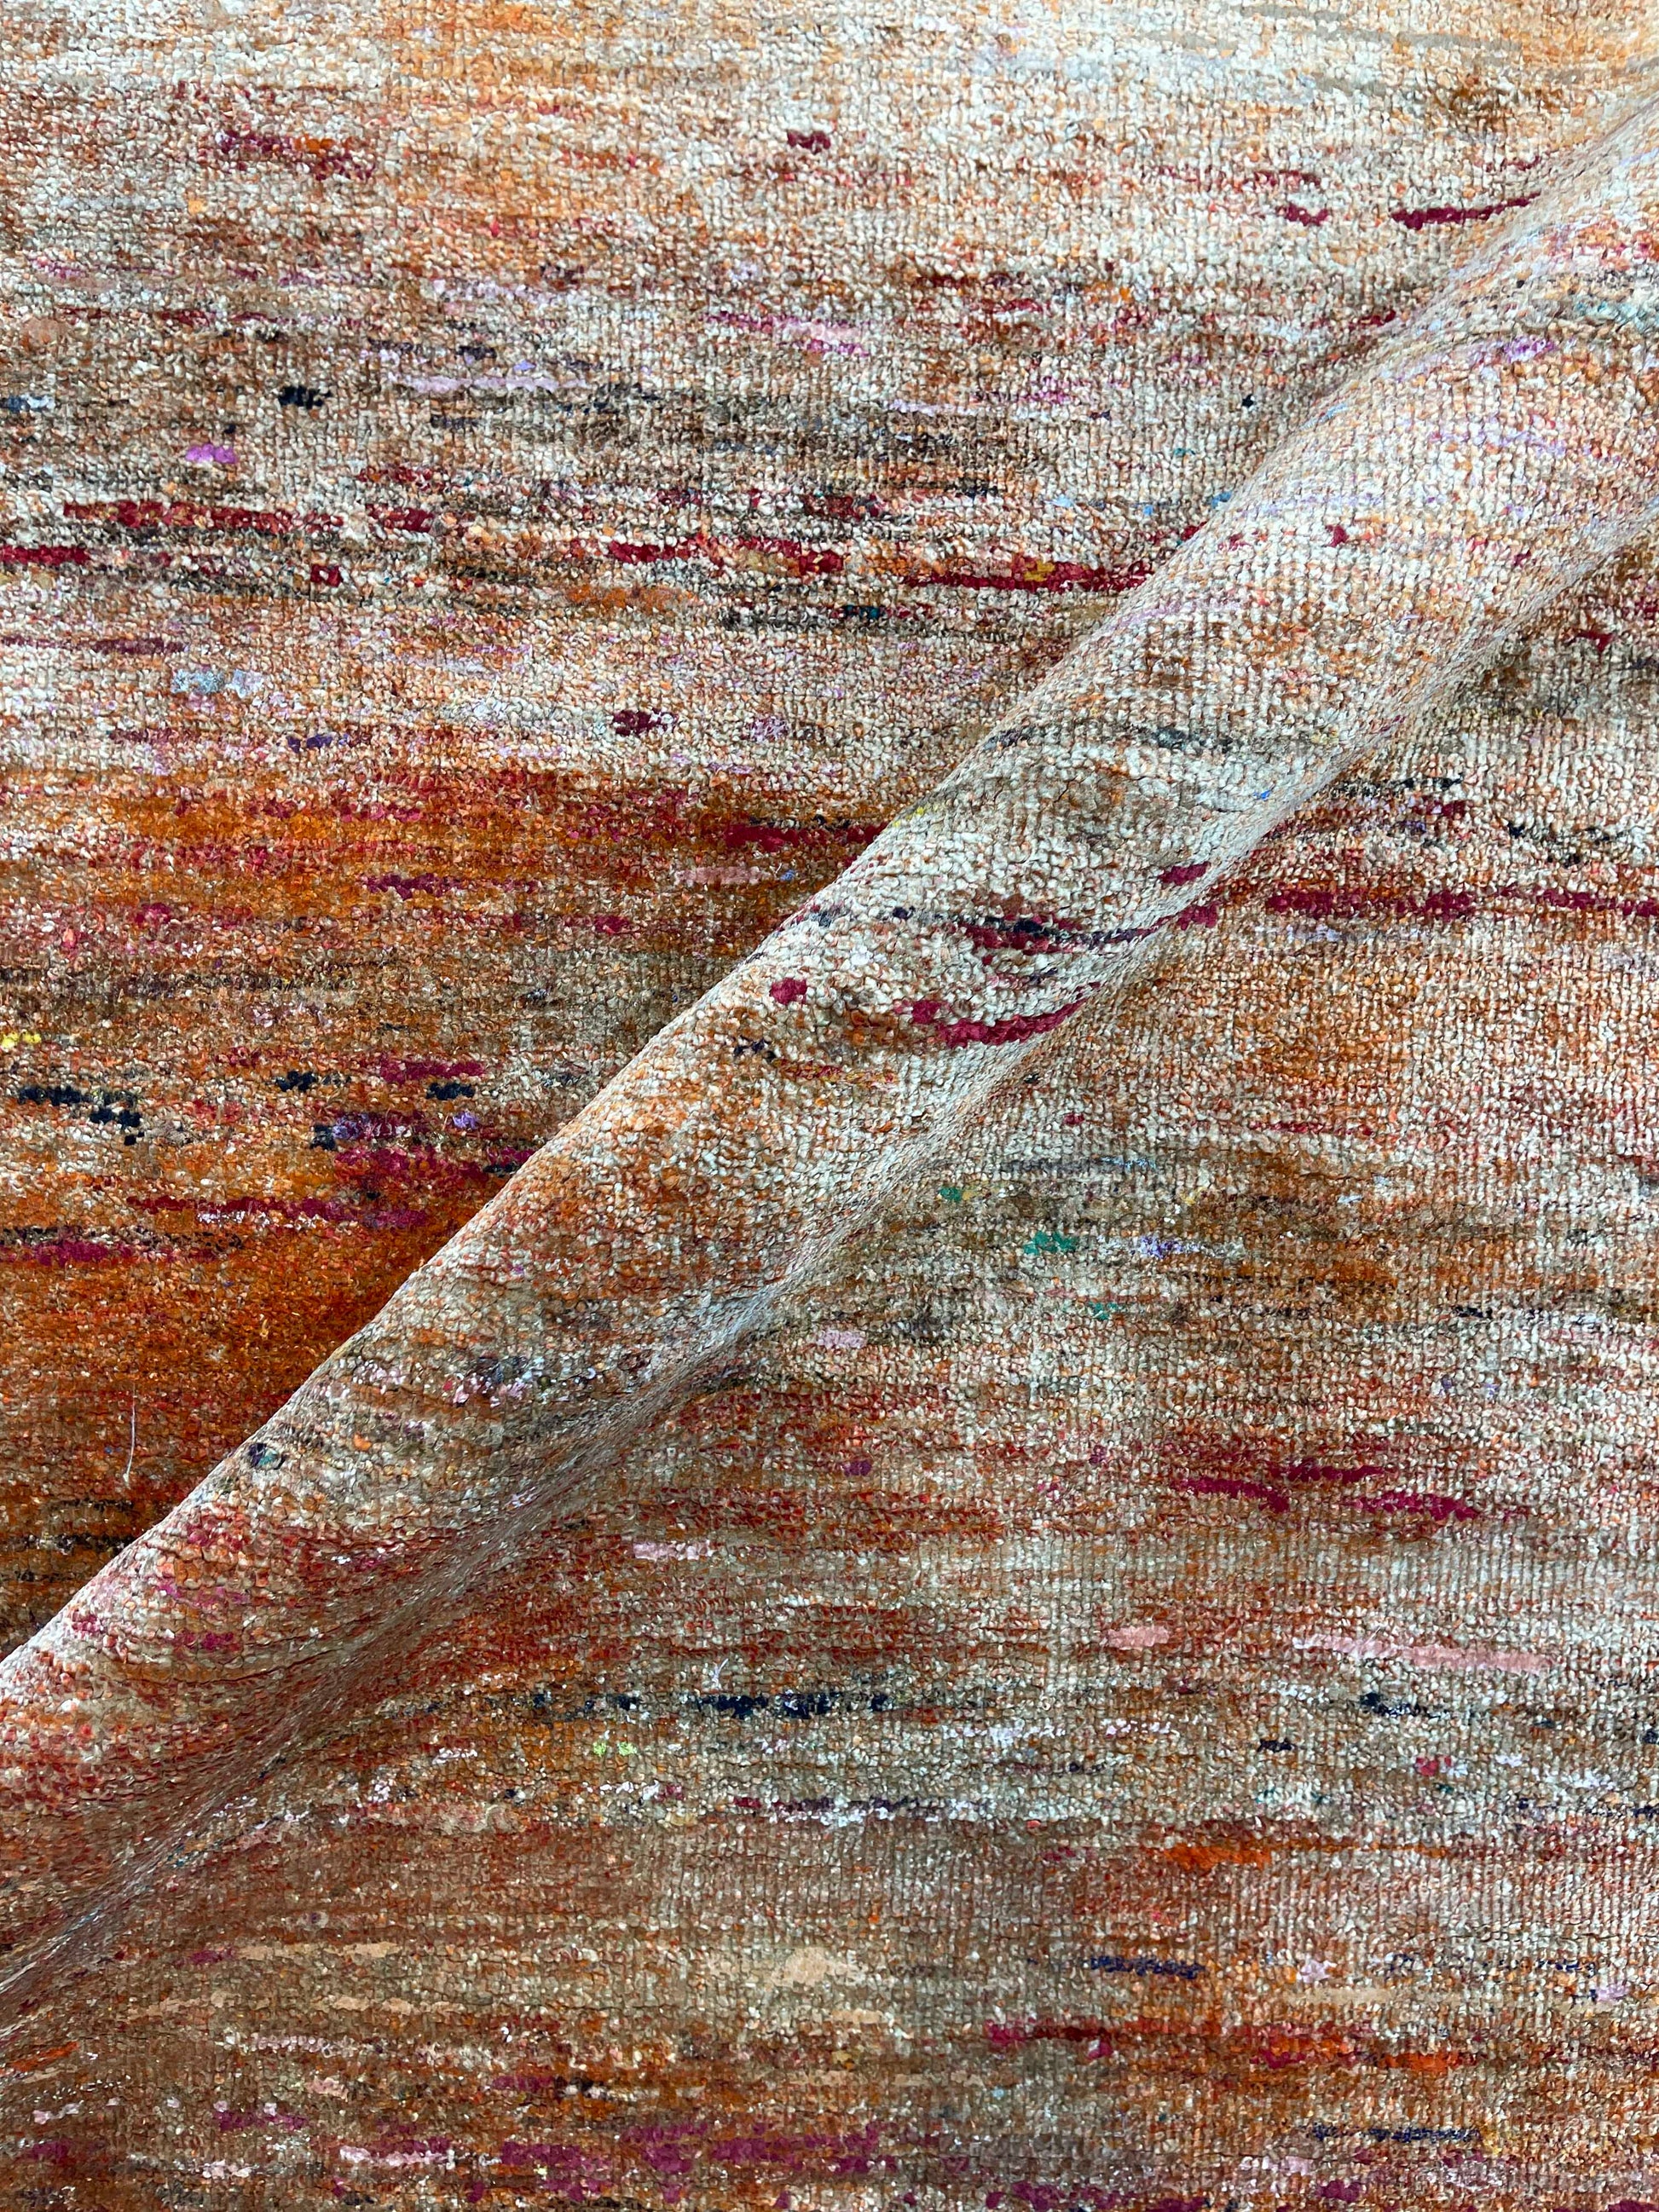 Get trendy with Orange Sari Silk Textured Modern Handknotted Area Rug 5.10x9.0ft 178x274Cms - Modern Rugs available at Jaipur Oriental Rugs. Grab yours for $3780.00 today!